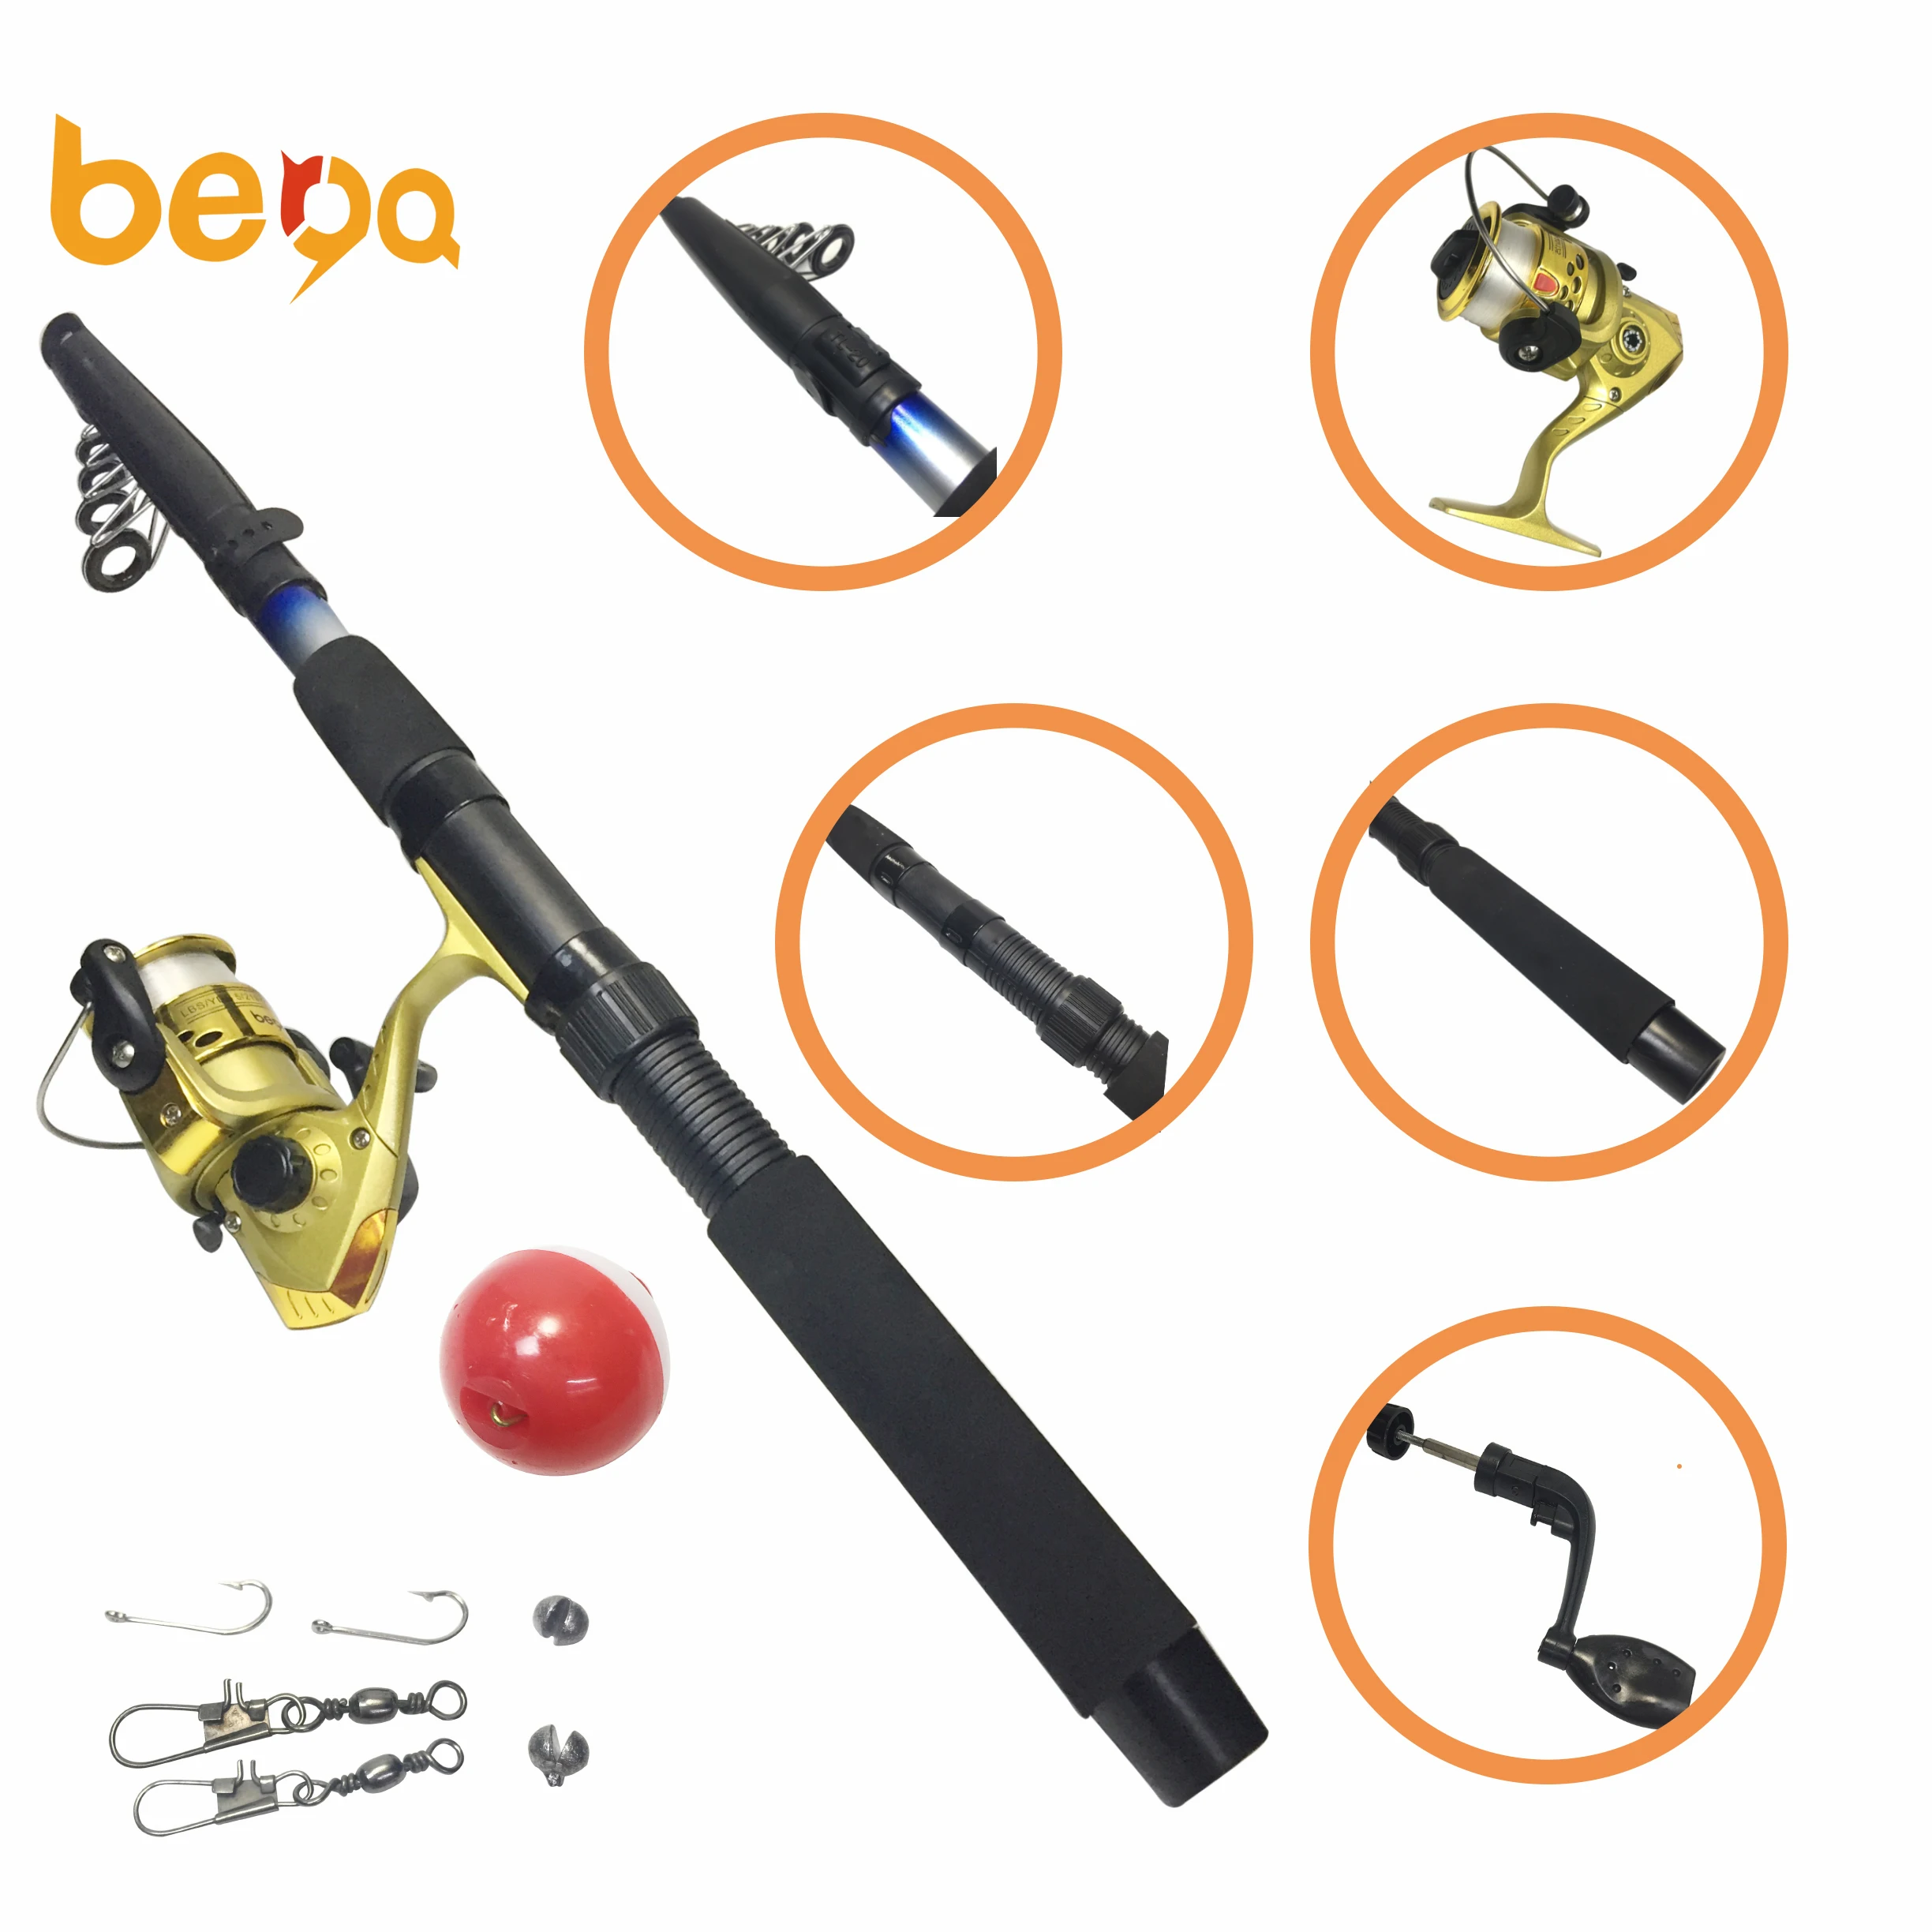 

New Spinning Telescopic Fishing Rod and reel Combo Kit Set with Fishing floats and hooks fishing combo blister package, Black/white/red/yellow/orange, customizable